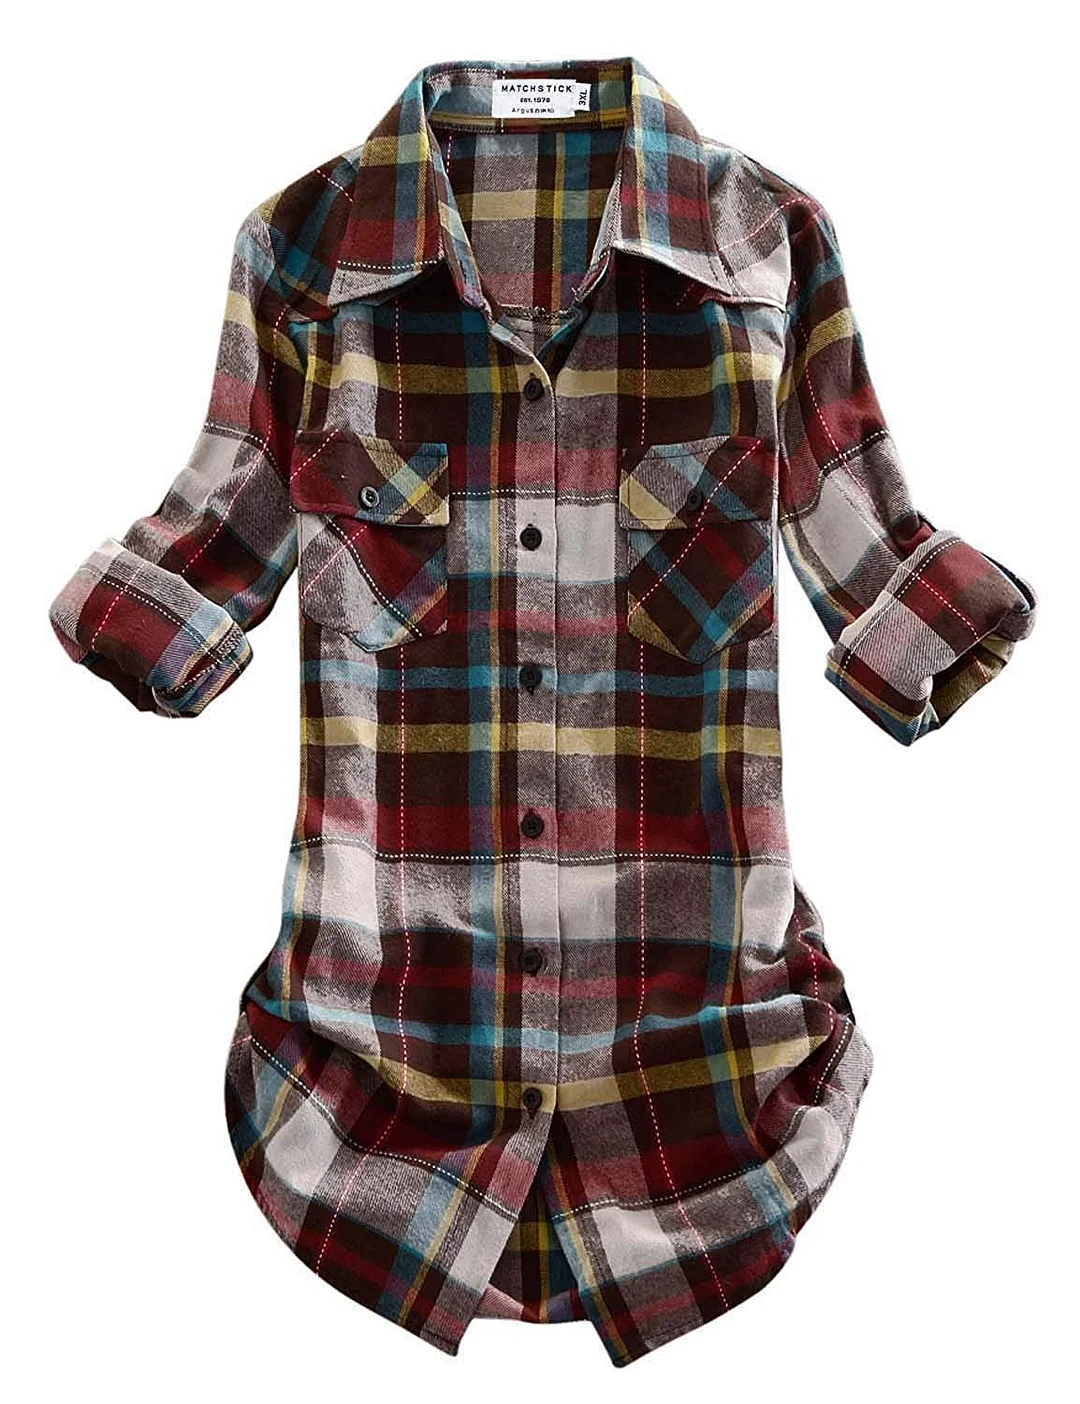 Women's Long Sleeve Flannel Plaid Shirt Slim fit, button up long sleeves